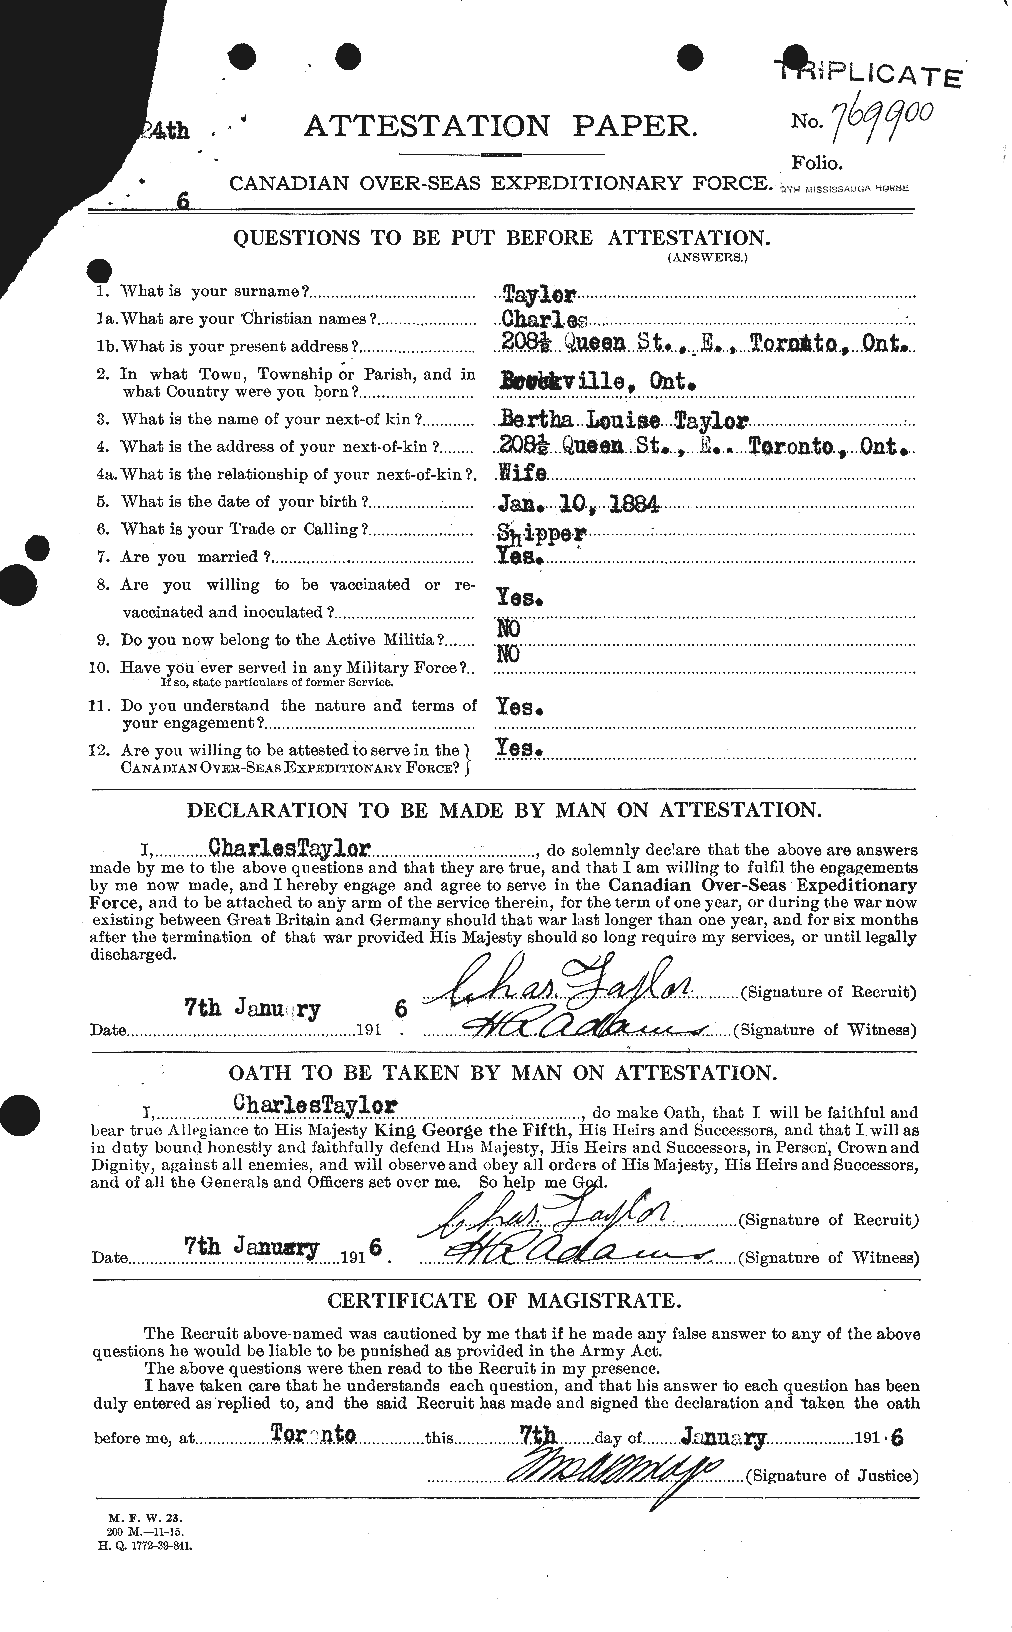 Personnel Records of the First World War - CEF 626820a